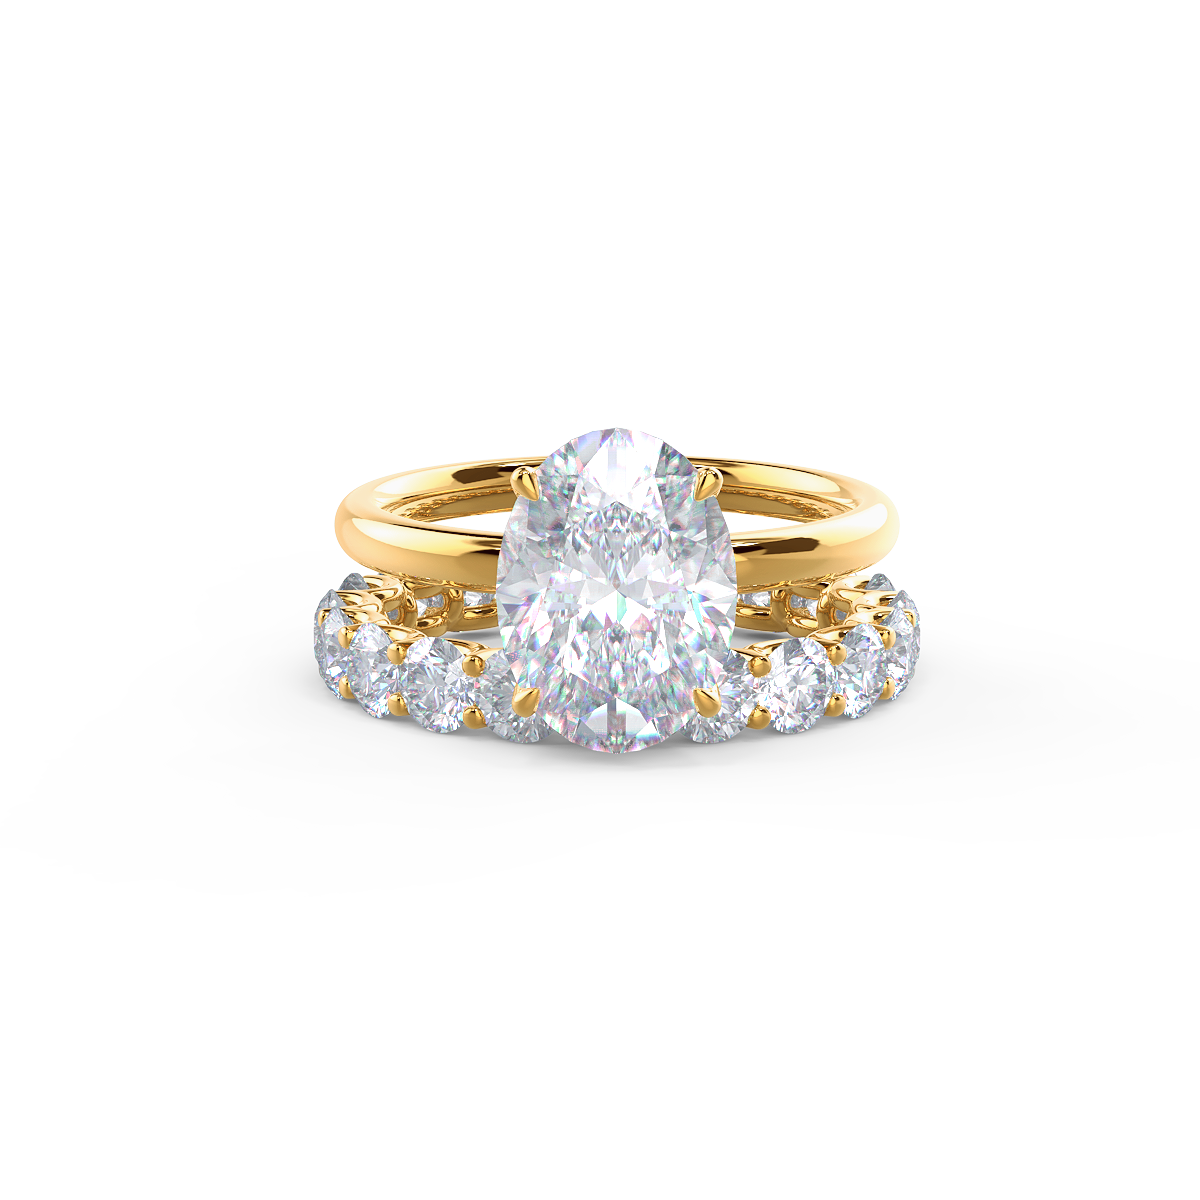  This setting pairs with a variety of wedding band styles.    Shop All Wedding Bands  